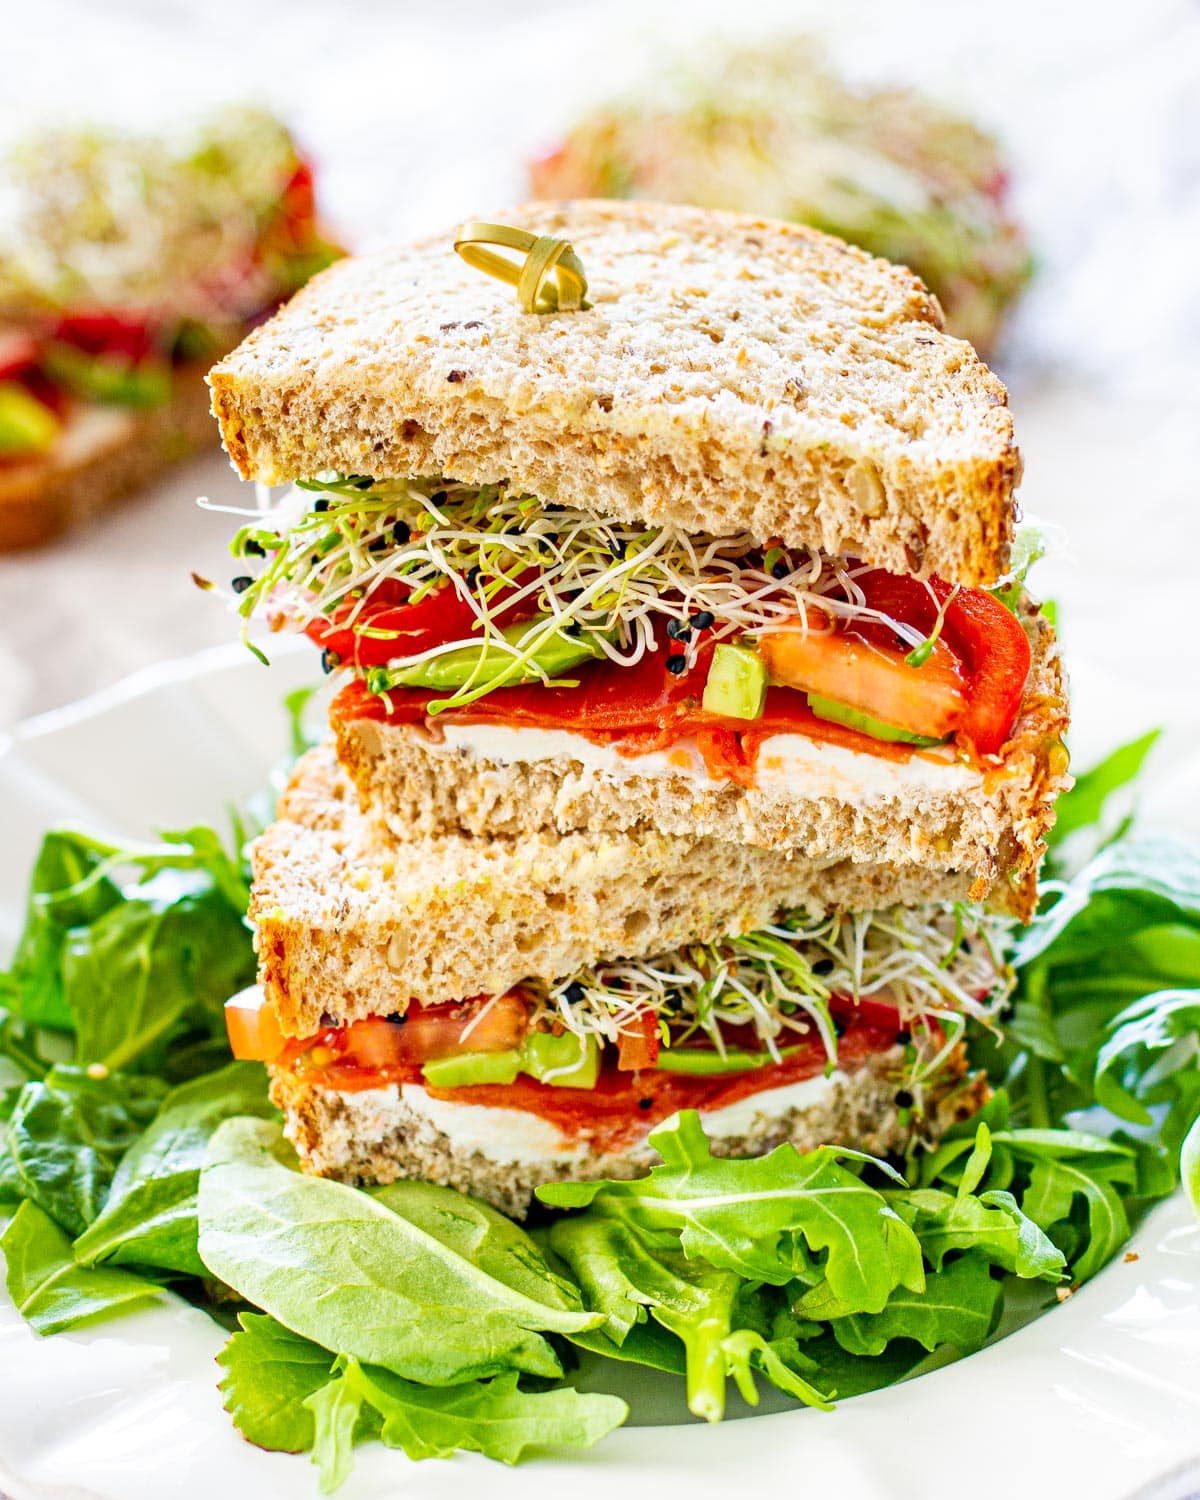 a smoked salmon loaded with veggies on whole grain bread cut in half and stacked on top of each other on a bed of arugula